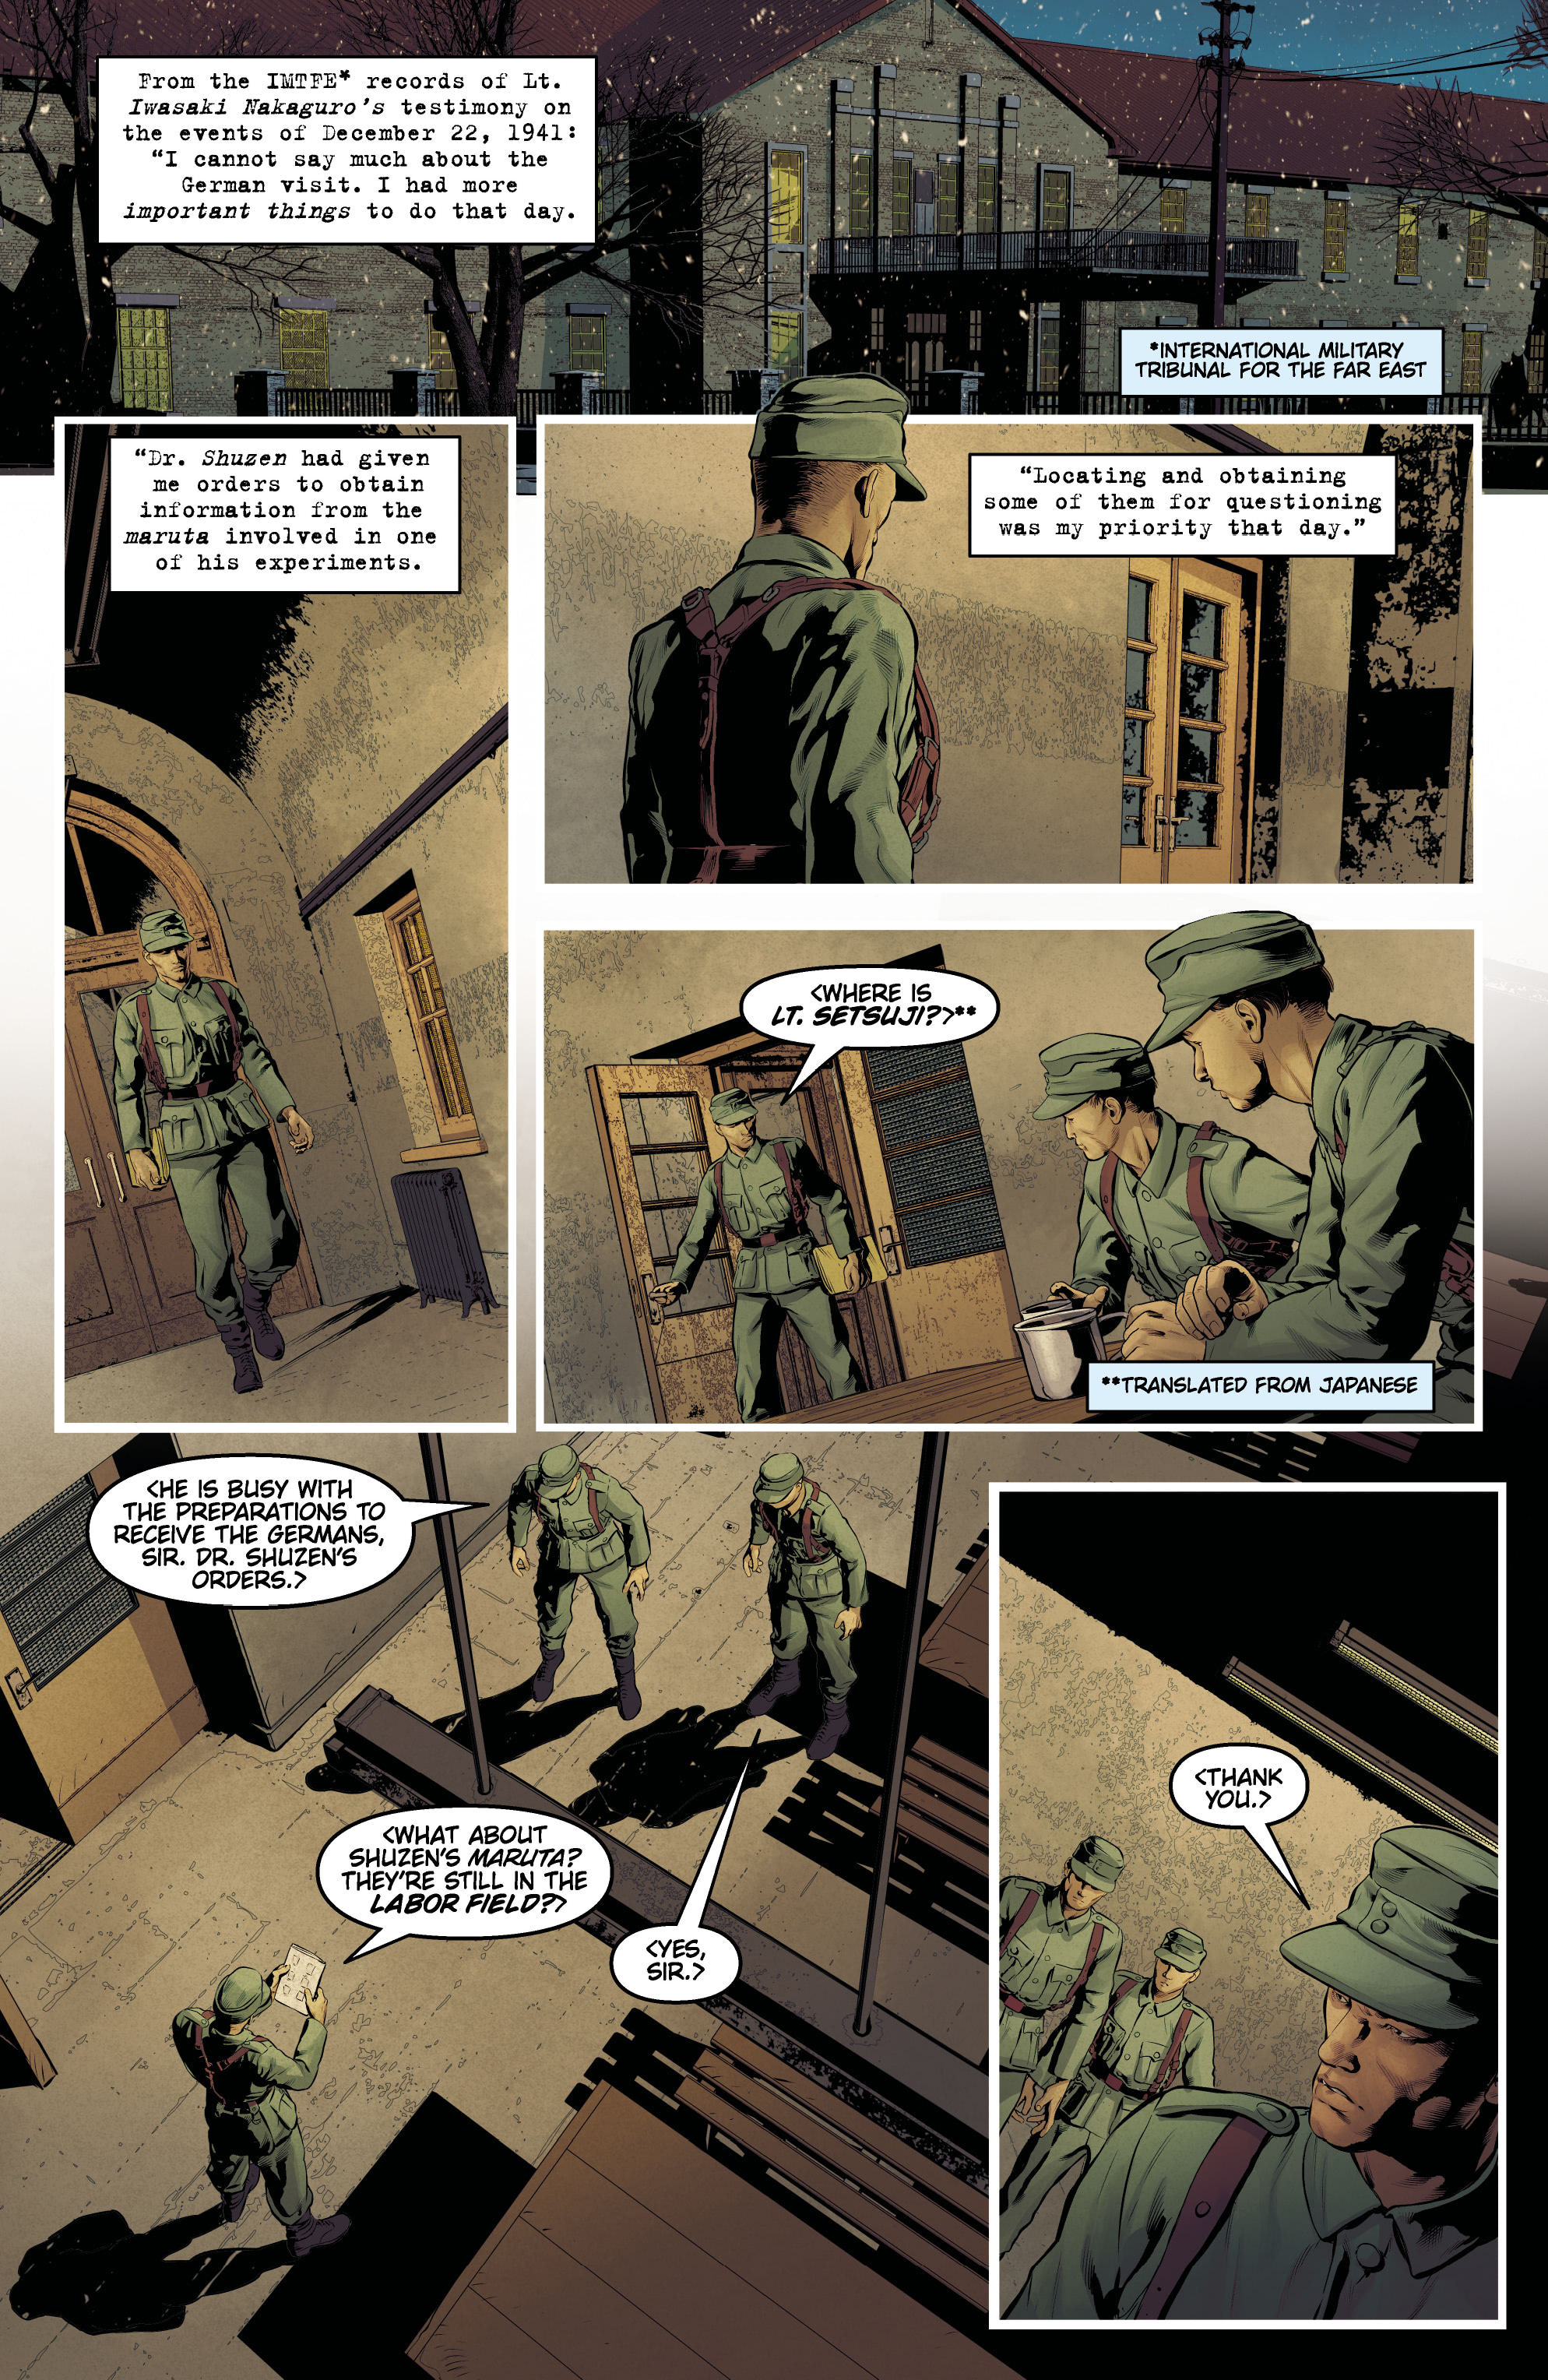 The Collector: Unit 731 (2022-): Chapter 3 - Page 4